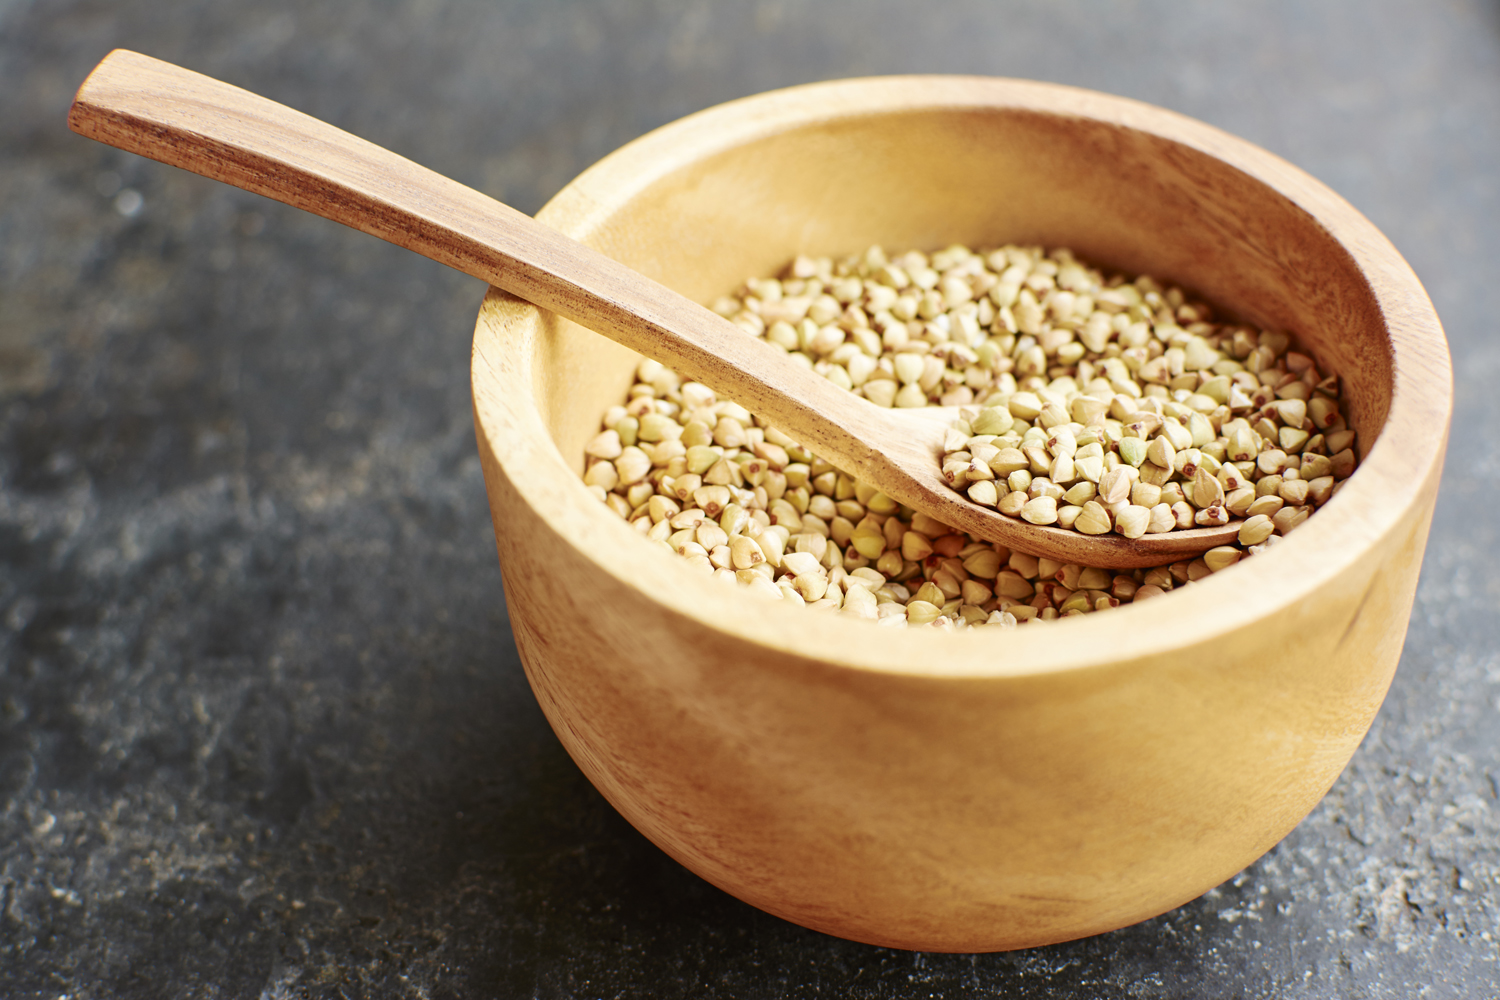 A wooden spoon in a bowl of hemp seeds